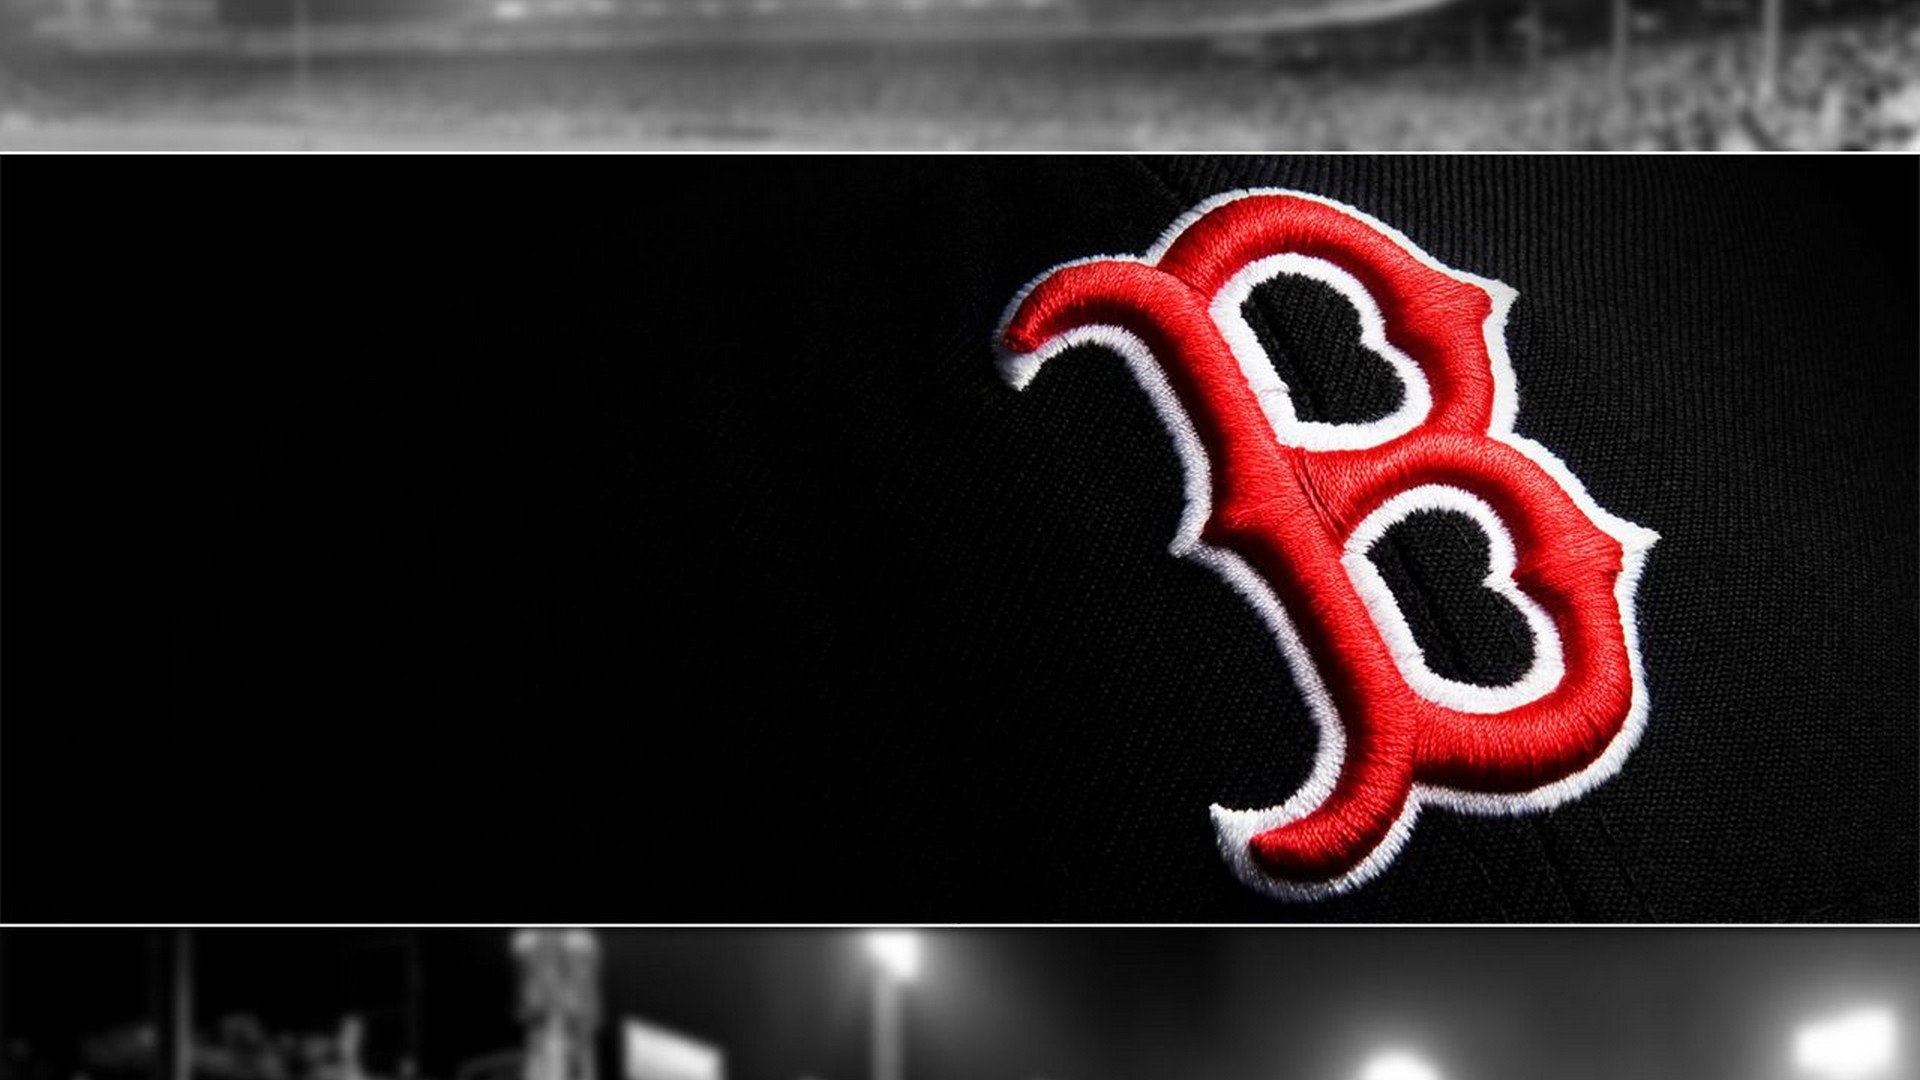 Boston Red Sox Wallpaper For Mac Wallpaper with high-resolution 1920x1080 pixel. You can use this wallpaper for Mac Desktop Wallpaper, Laptop Screensavers, Android Wallpapers, Tablet or iPhone Home Screen and another mobile phone device